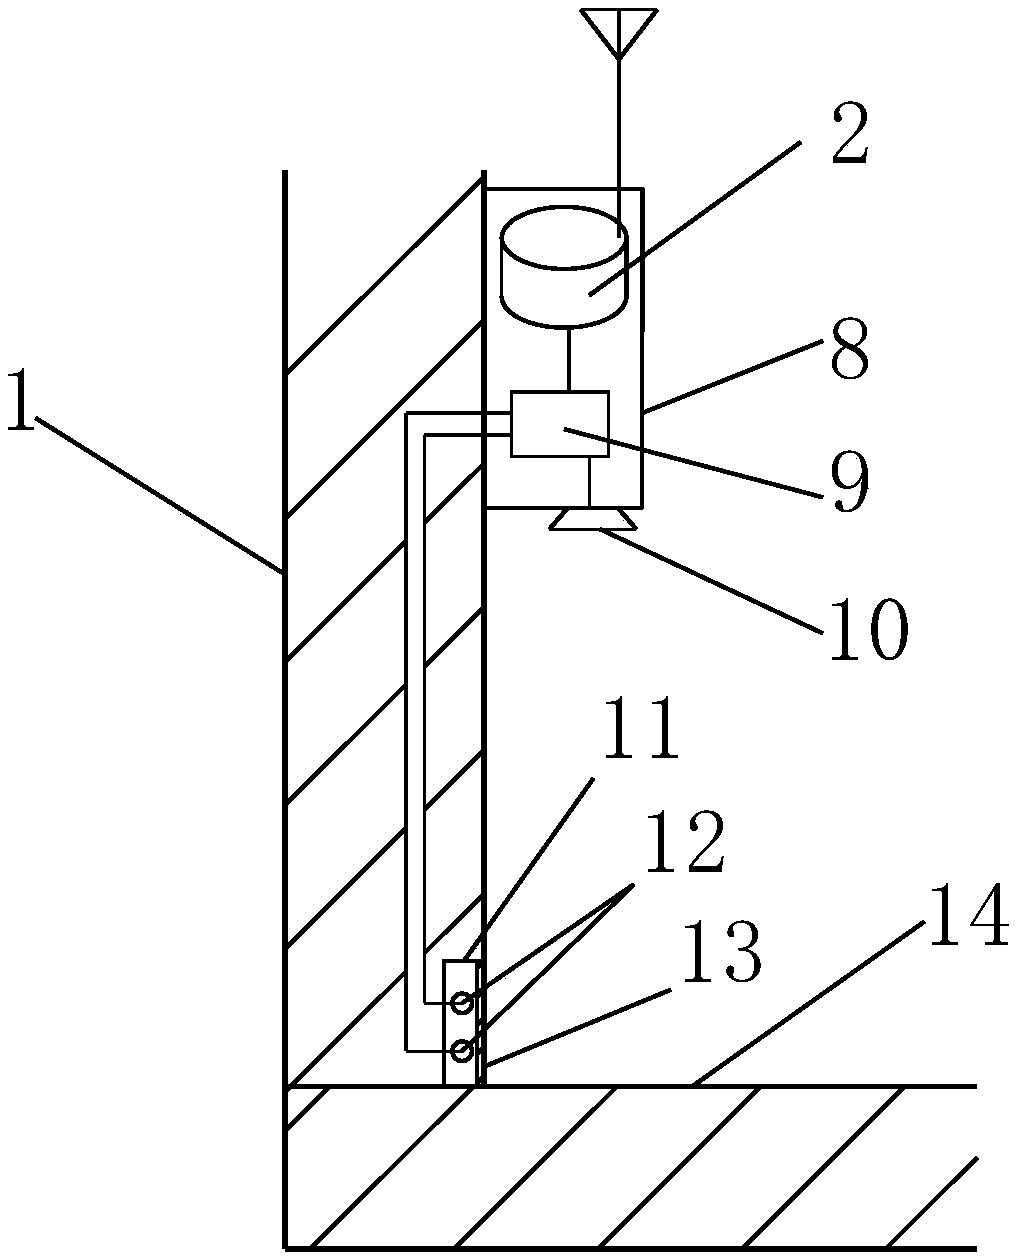 Ground accumulated water depth measurement system and method